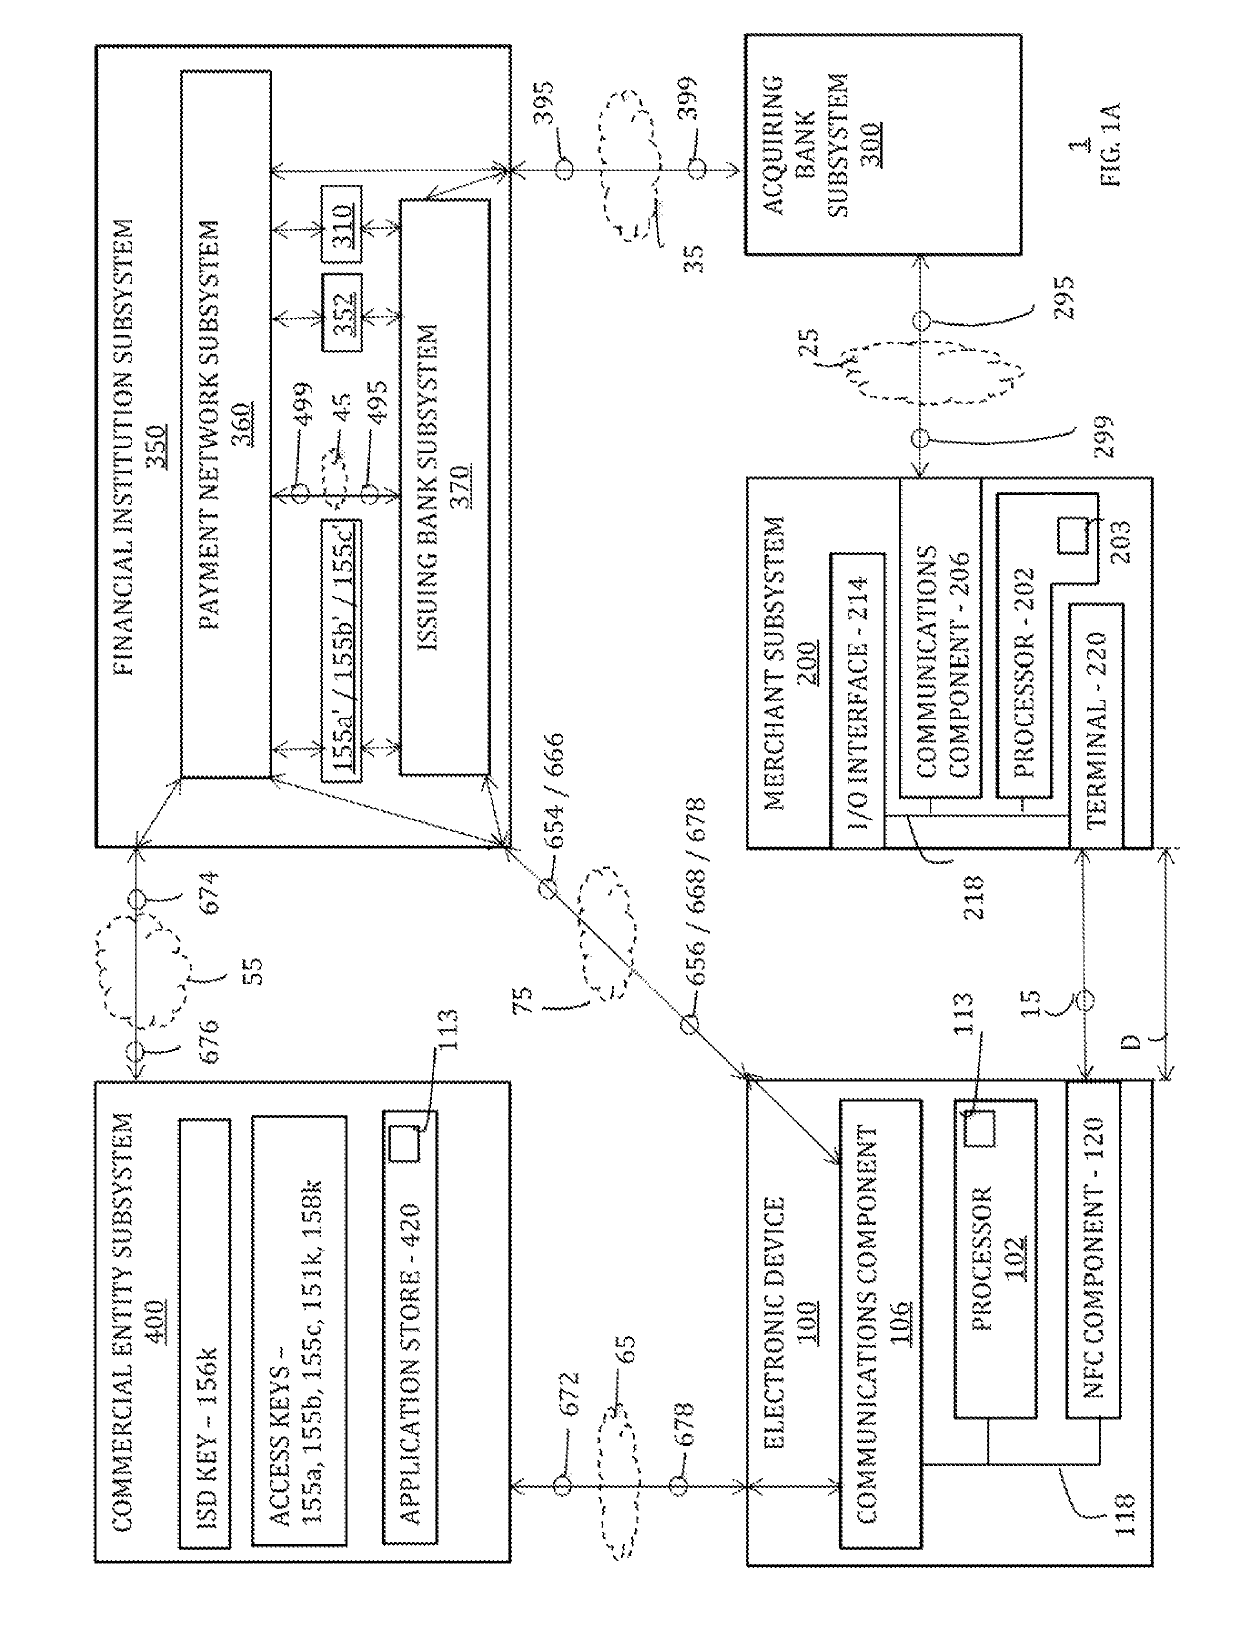 Management of credentials on an electronic device using an online resource